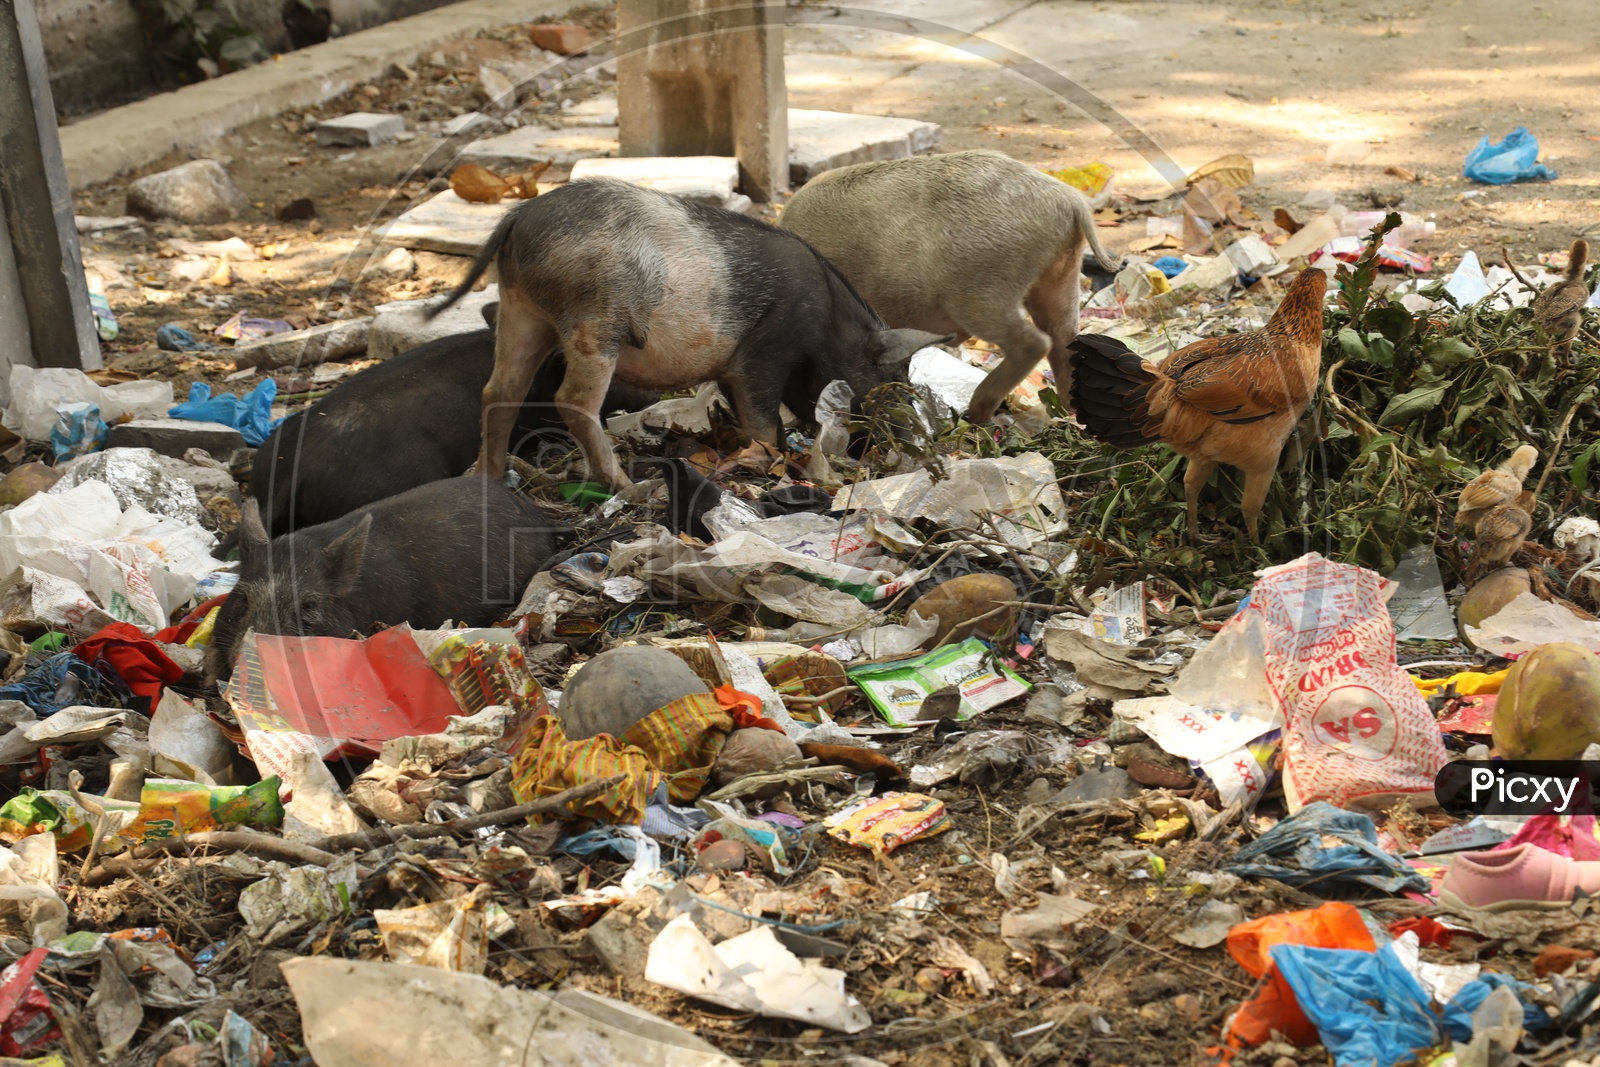 Pigs foraging for food in garbage